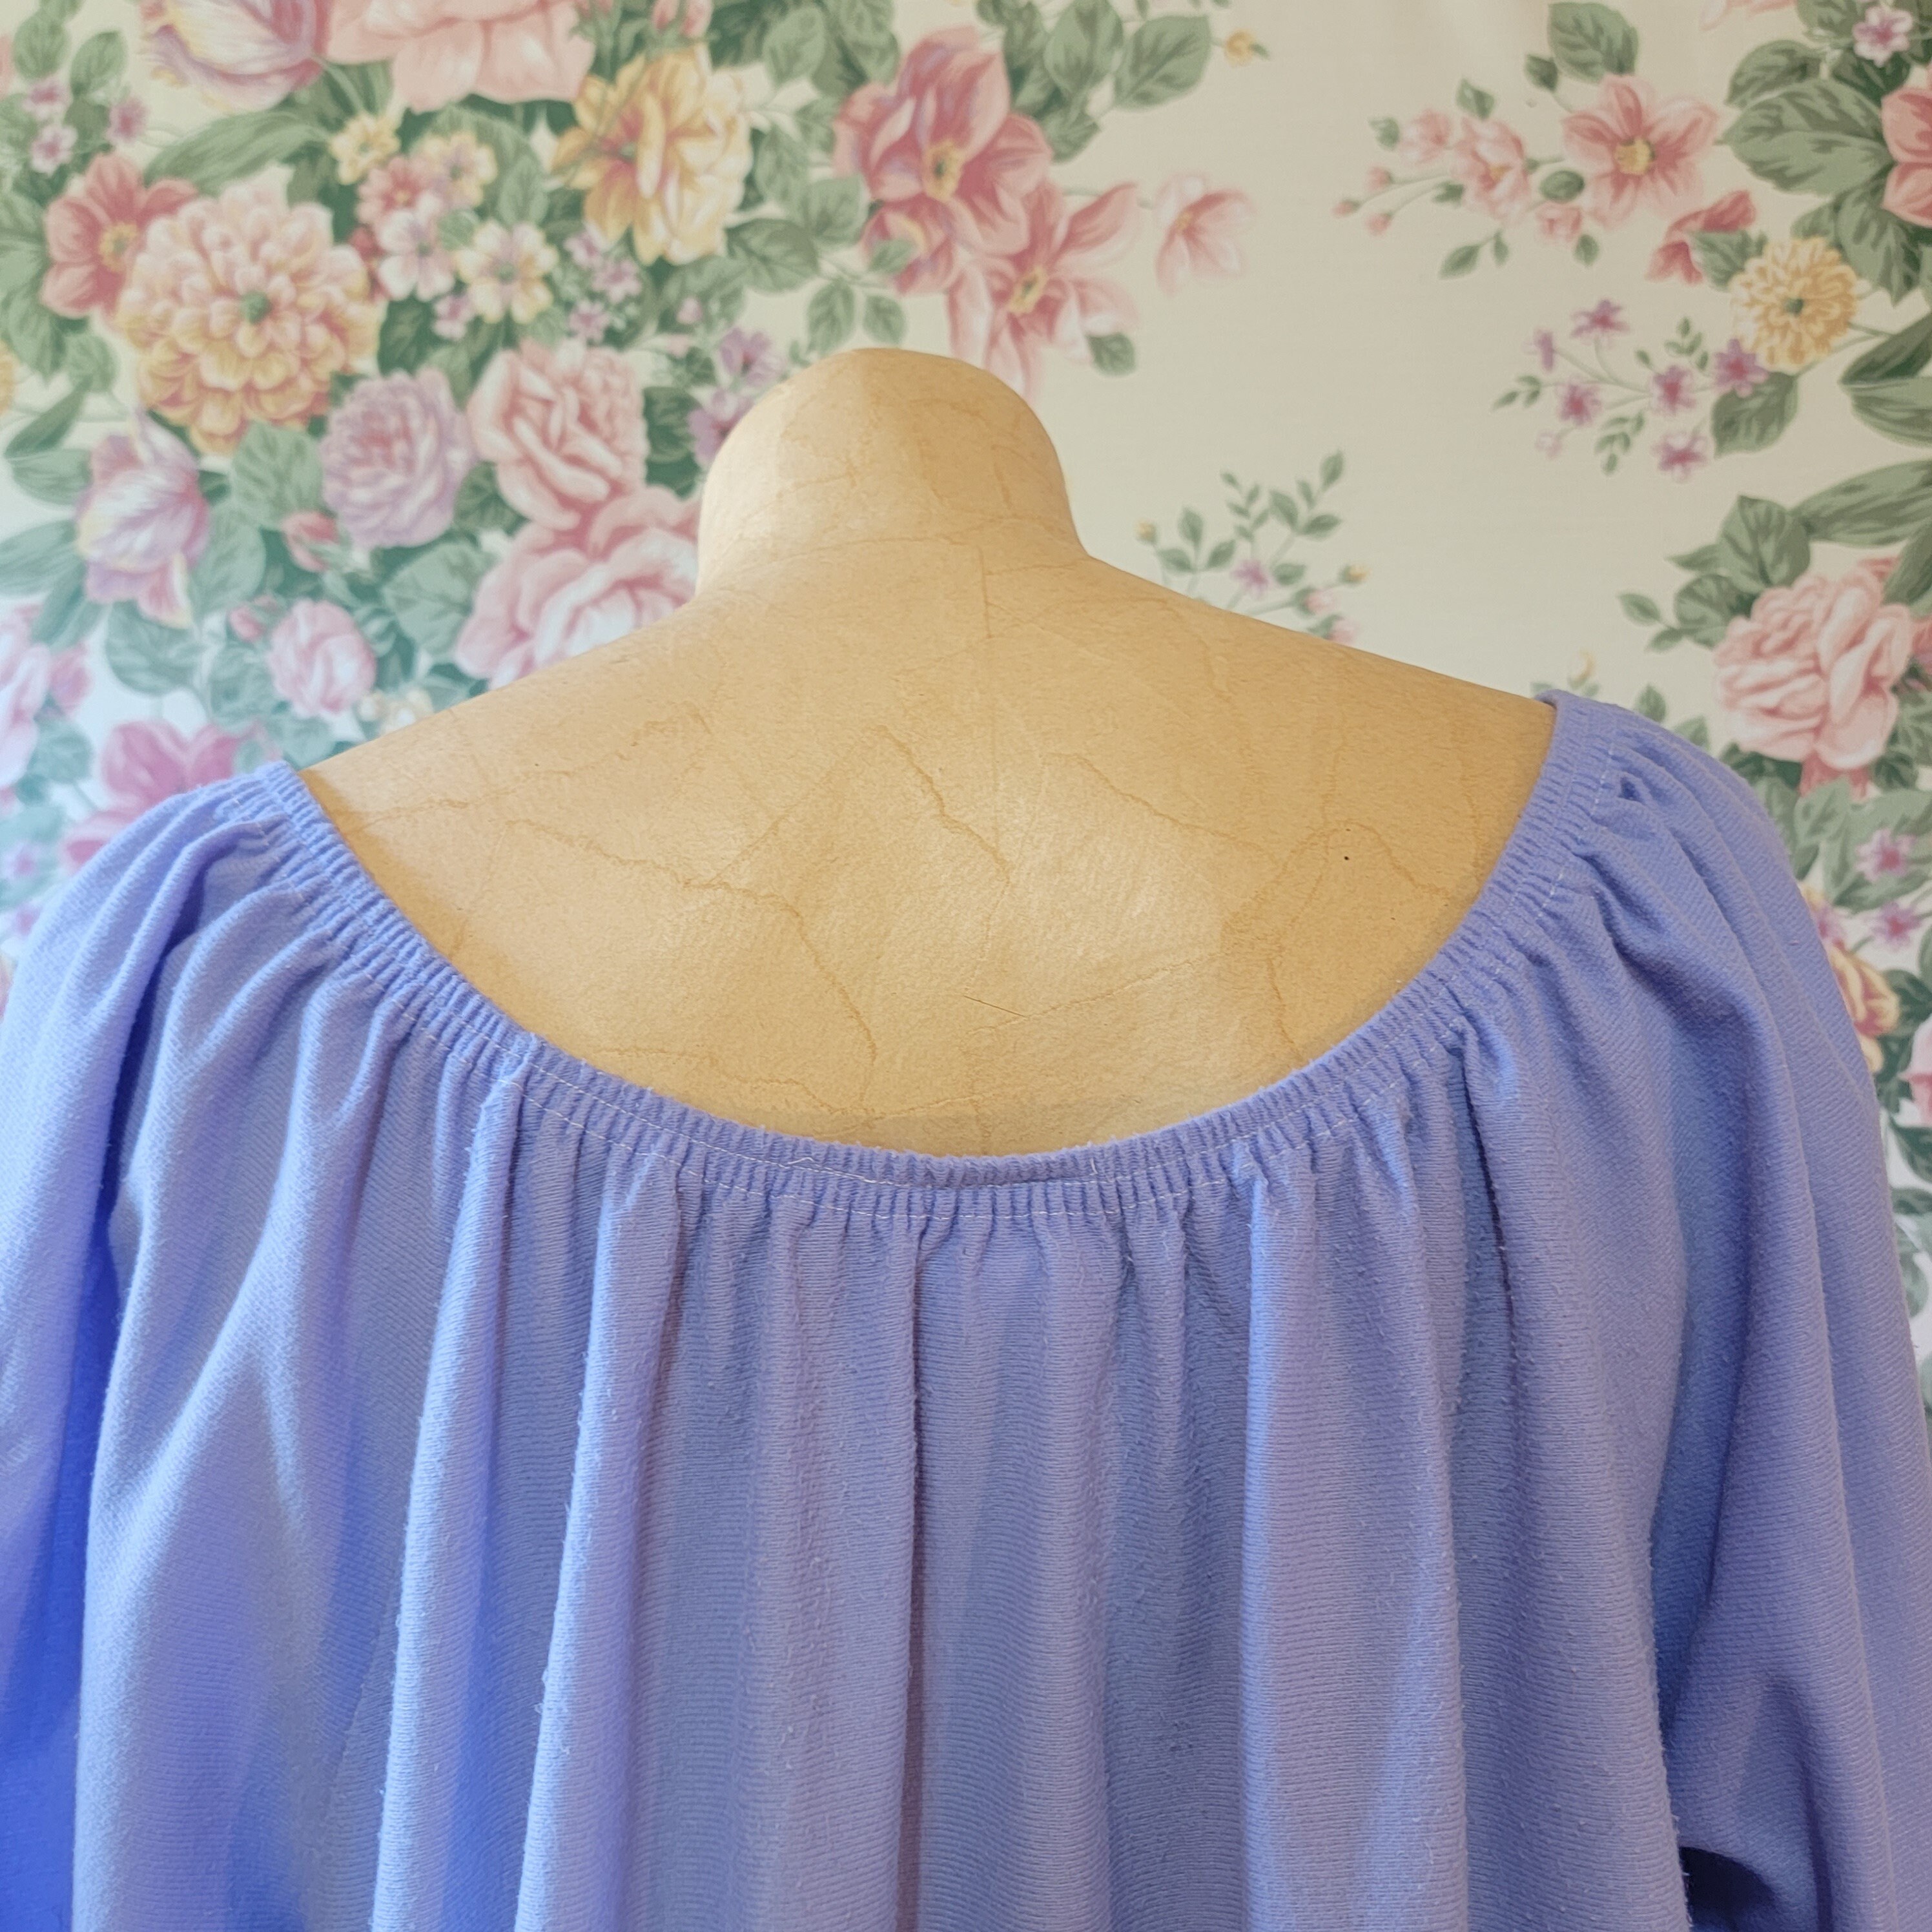 Vintage Kelly Reed Nightgown // Rare Blue Lavender Victorian - Etsy